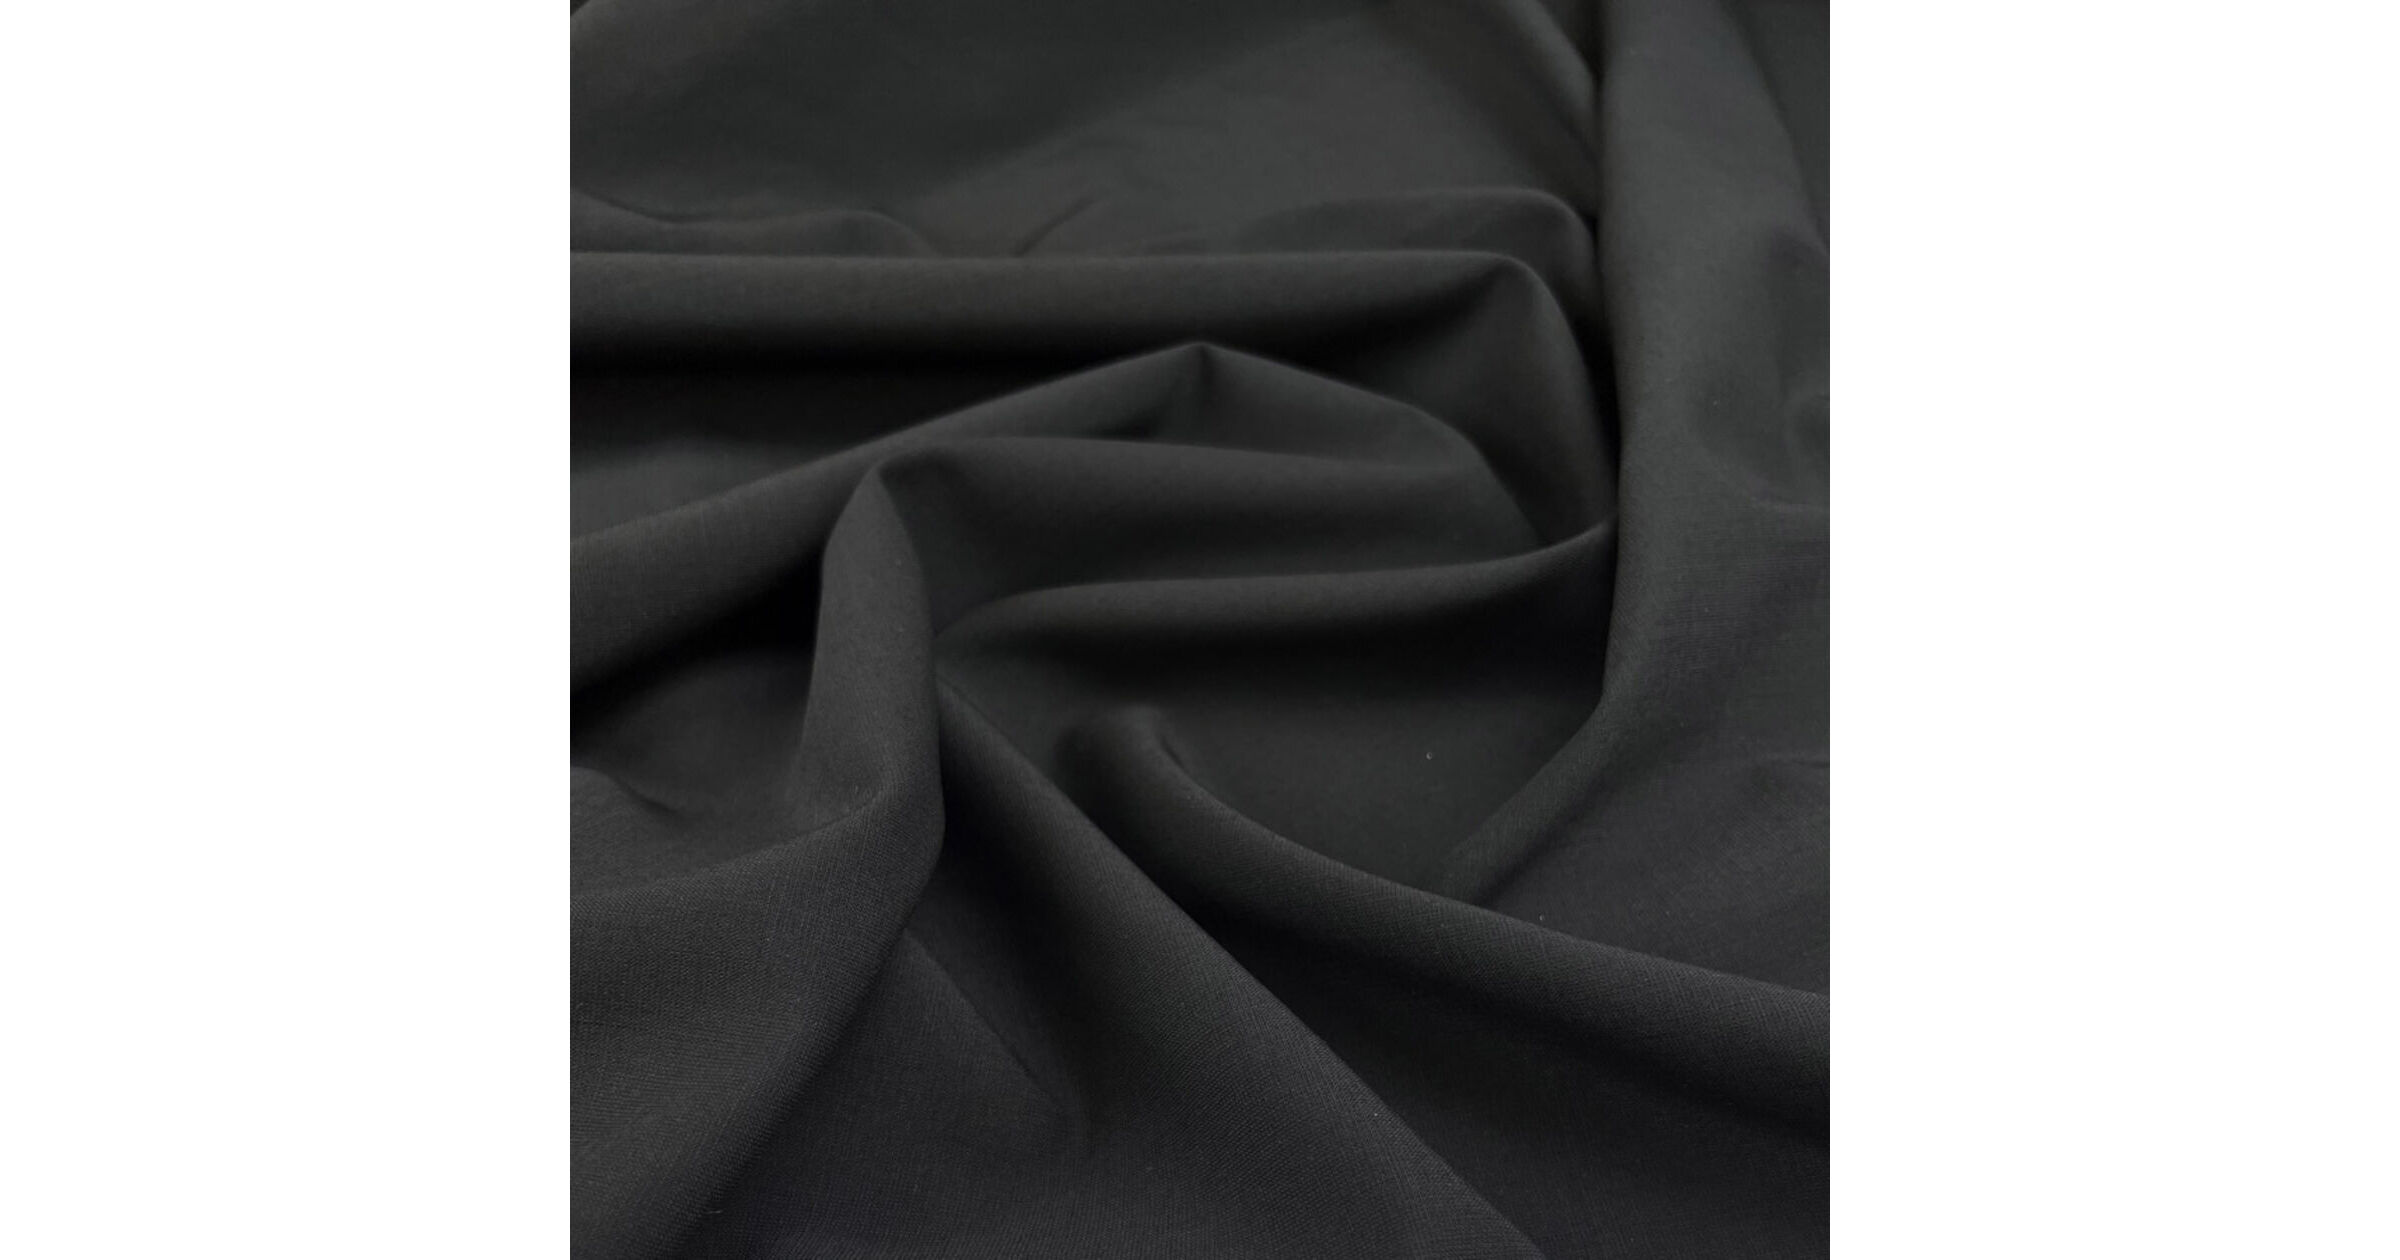 Wool Fabric, Café Au Lait Stretch Virgin Wool Crepe Suiting (Made